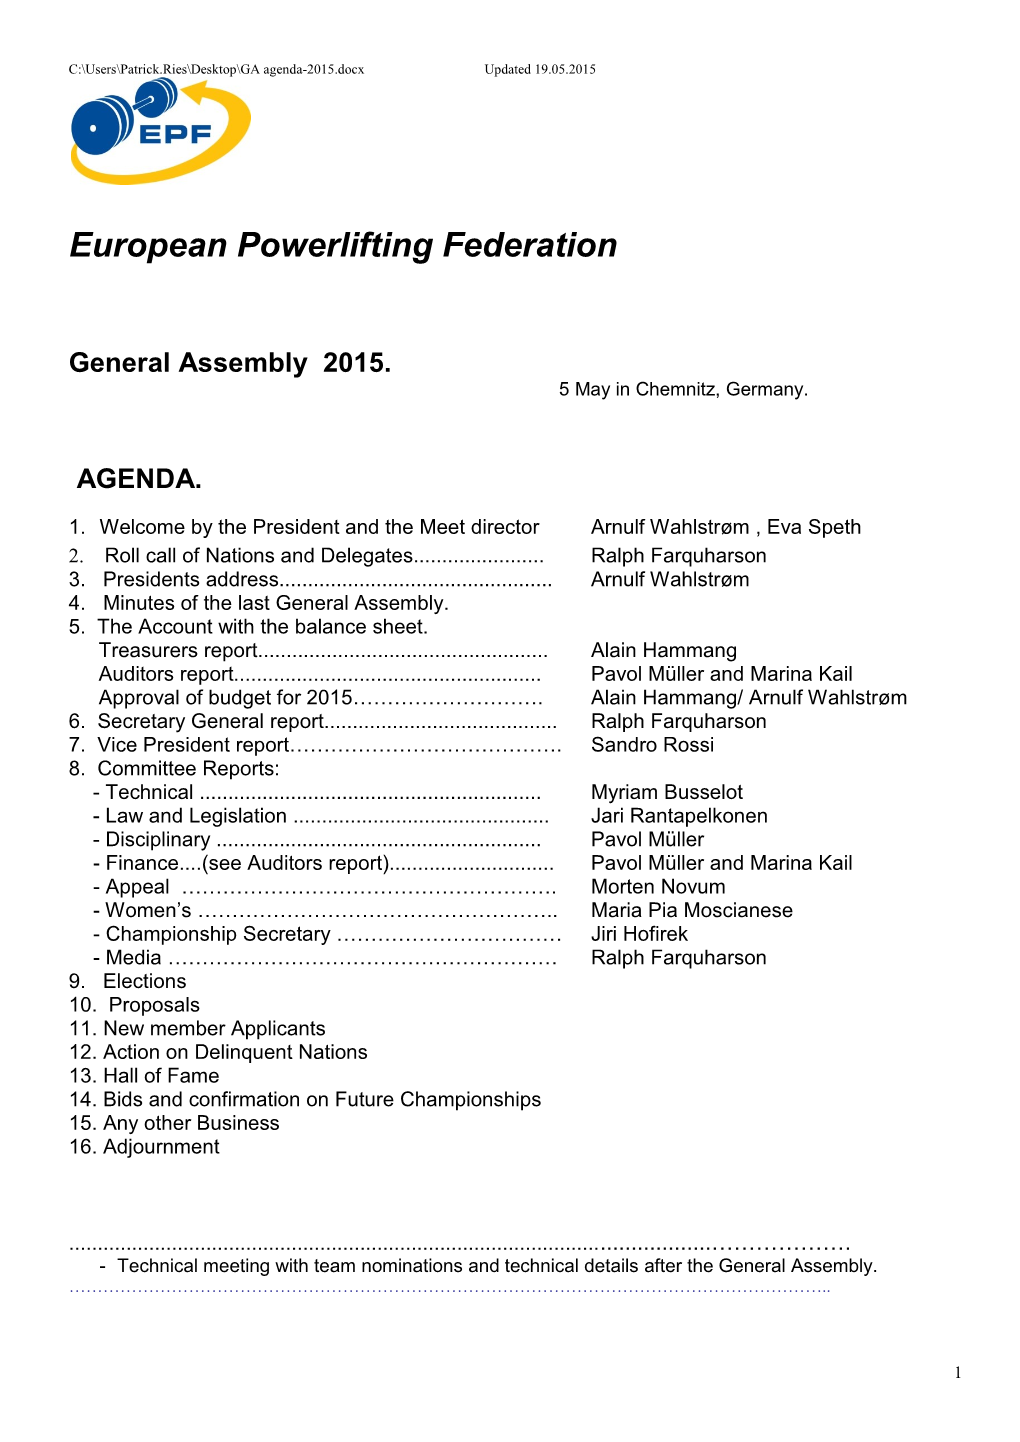 Agenda to the EPF General Assembly